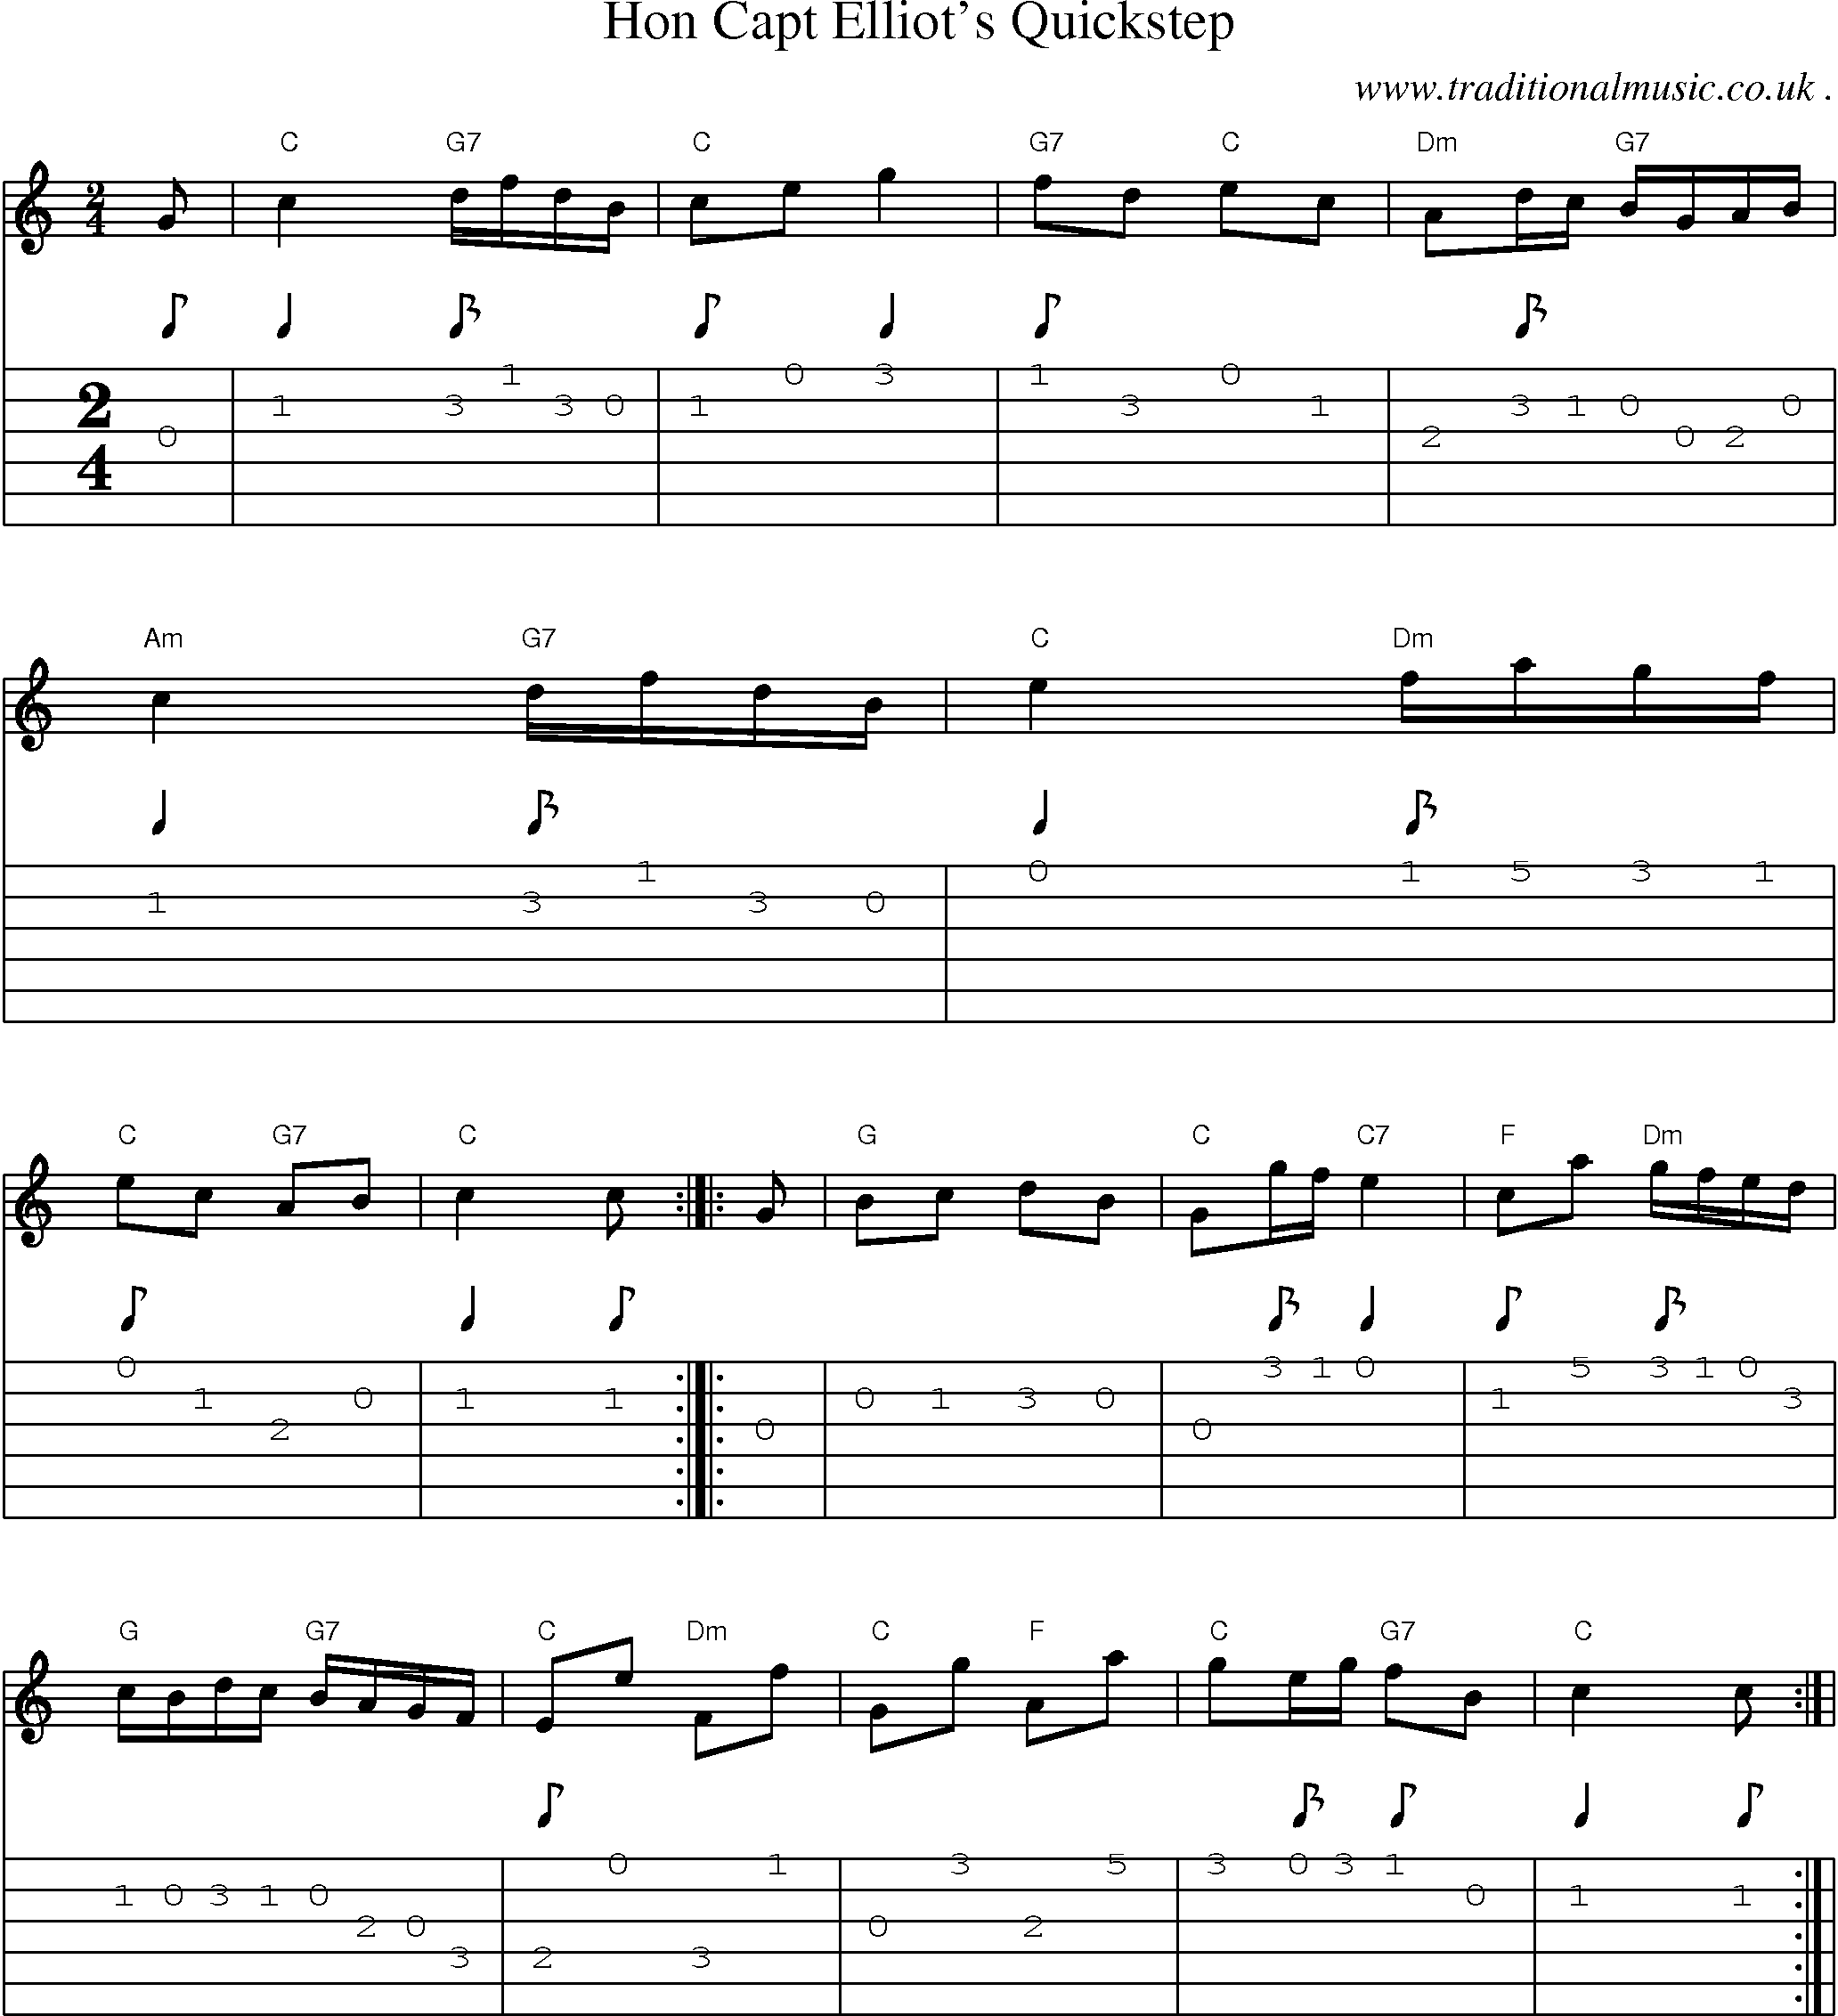 Sheet-music  score, Chords and Guitar Tabs for Hon Capt Elliots Quickstep